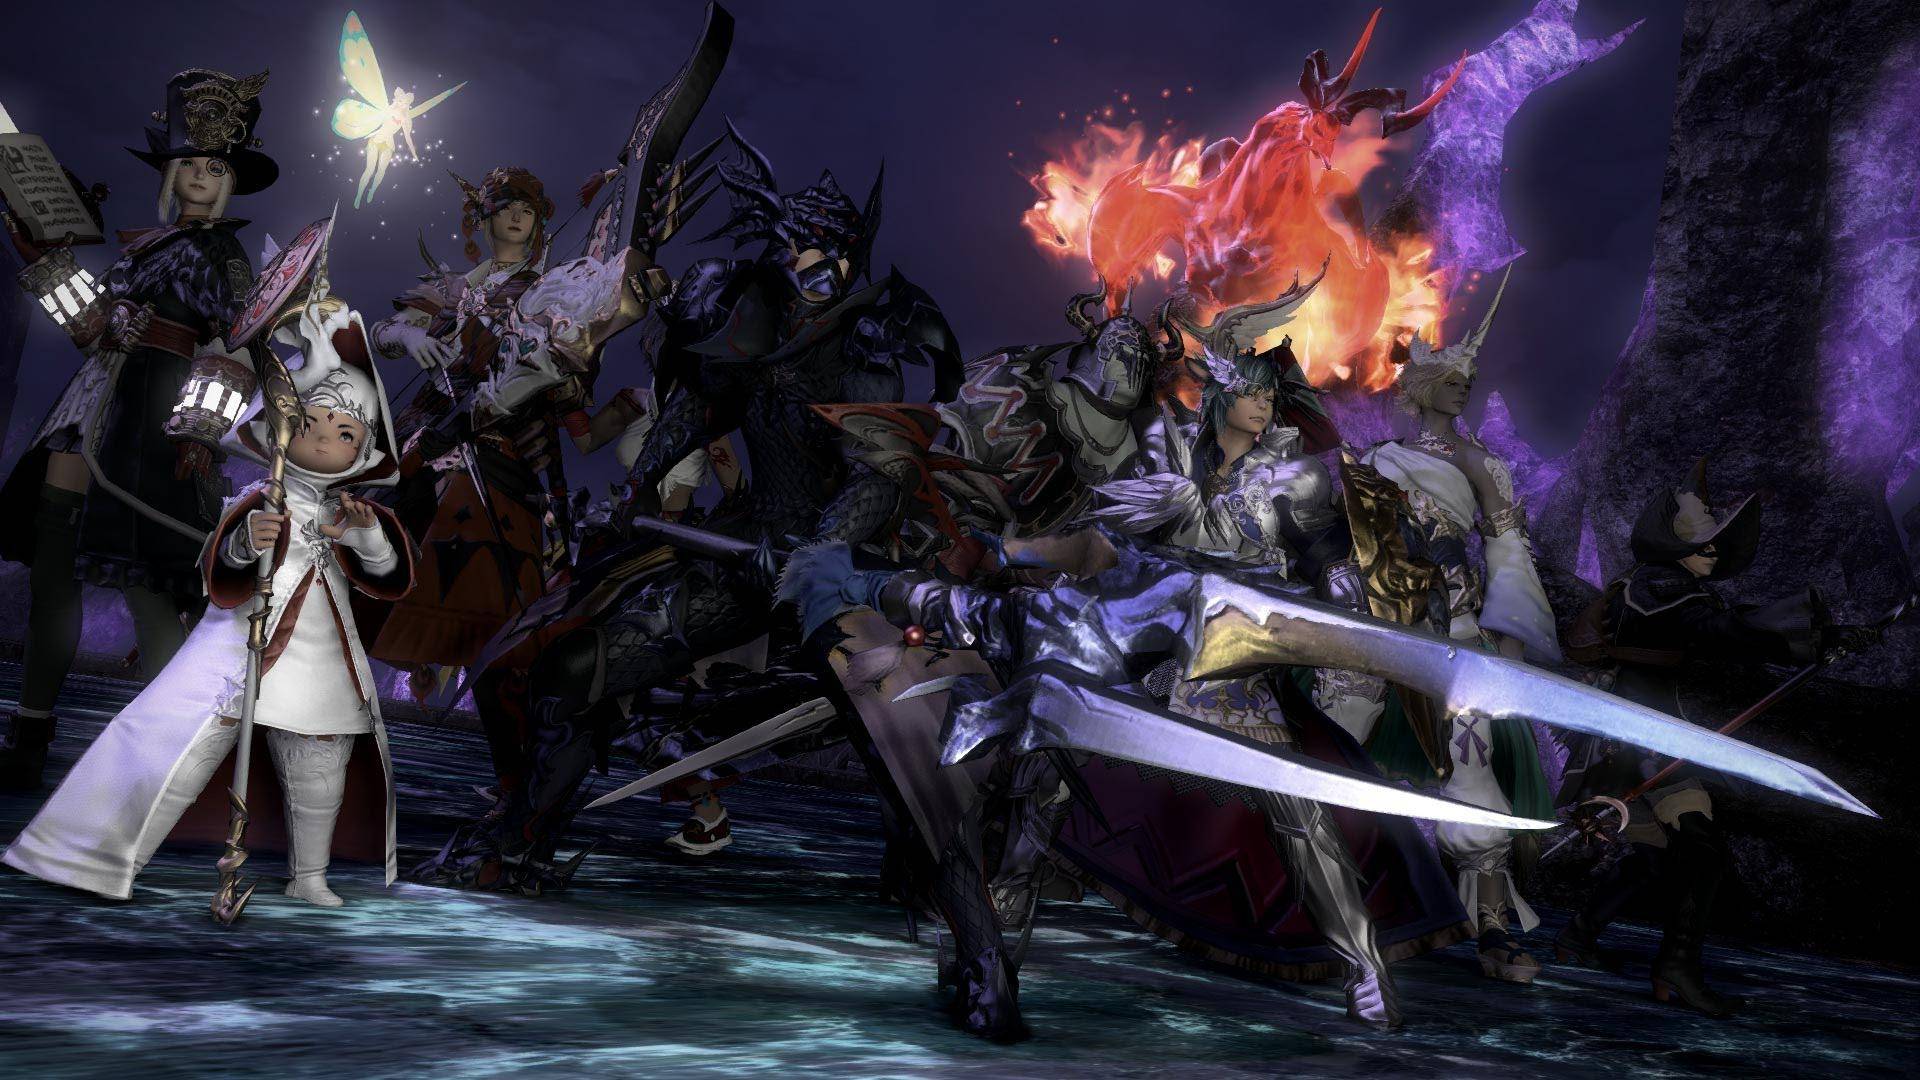 Final Fantasy XIV's Fantastic PS4 Theme Is Now Available and Free in